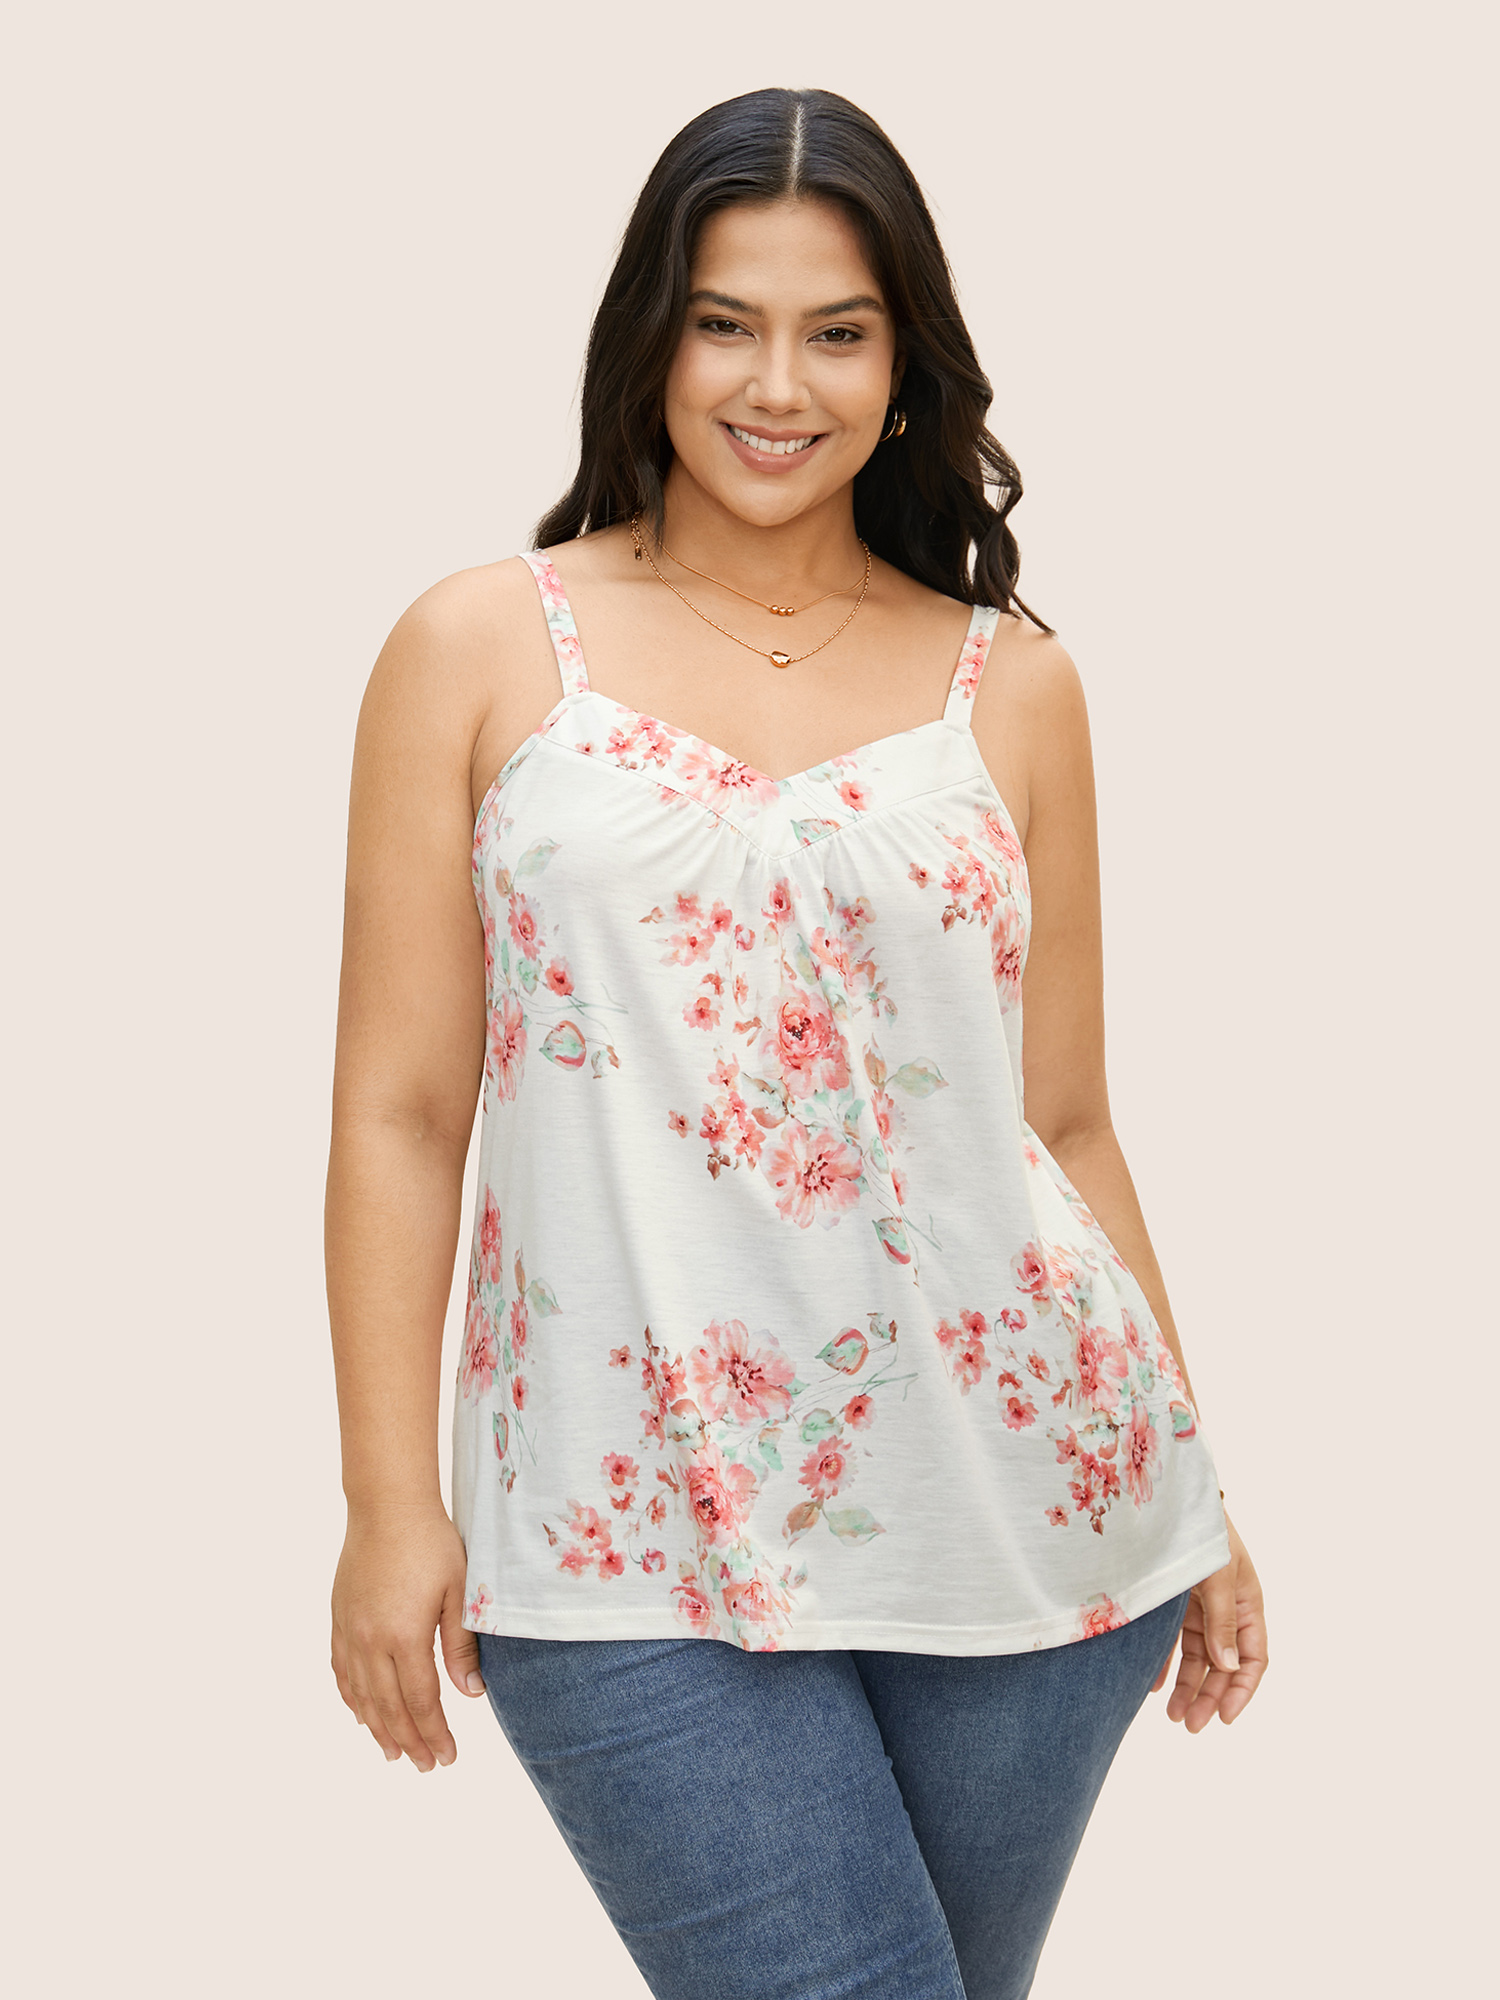 

Plus Size Natural Flowers Adjustable Straps Cami Top Women Crepe Elegant Contrast Non Everyday Tank Tops Camis BloomChic